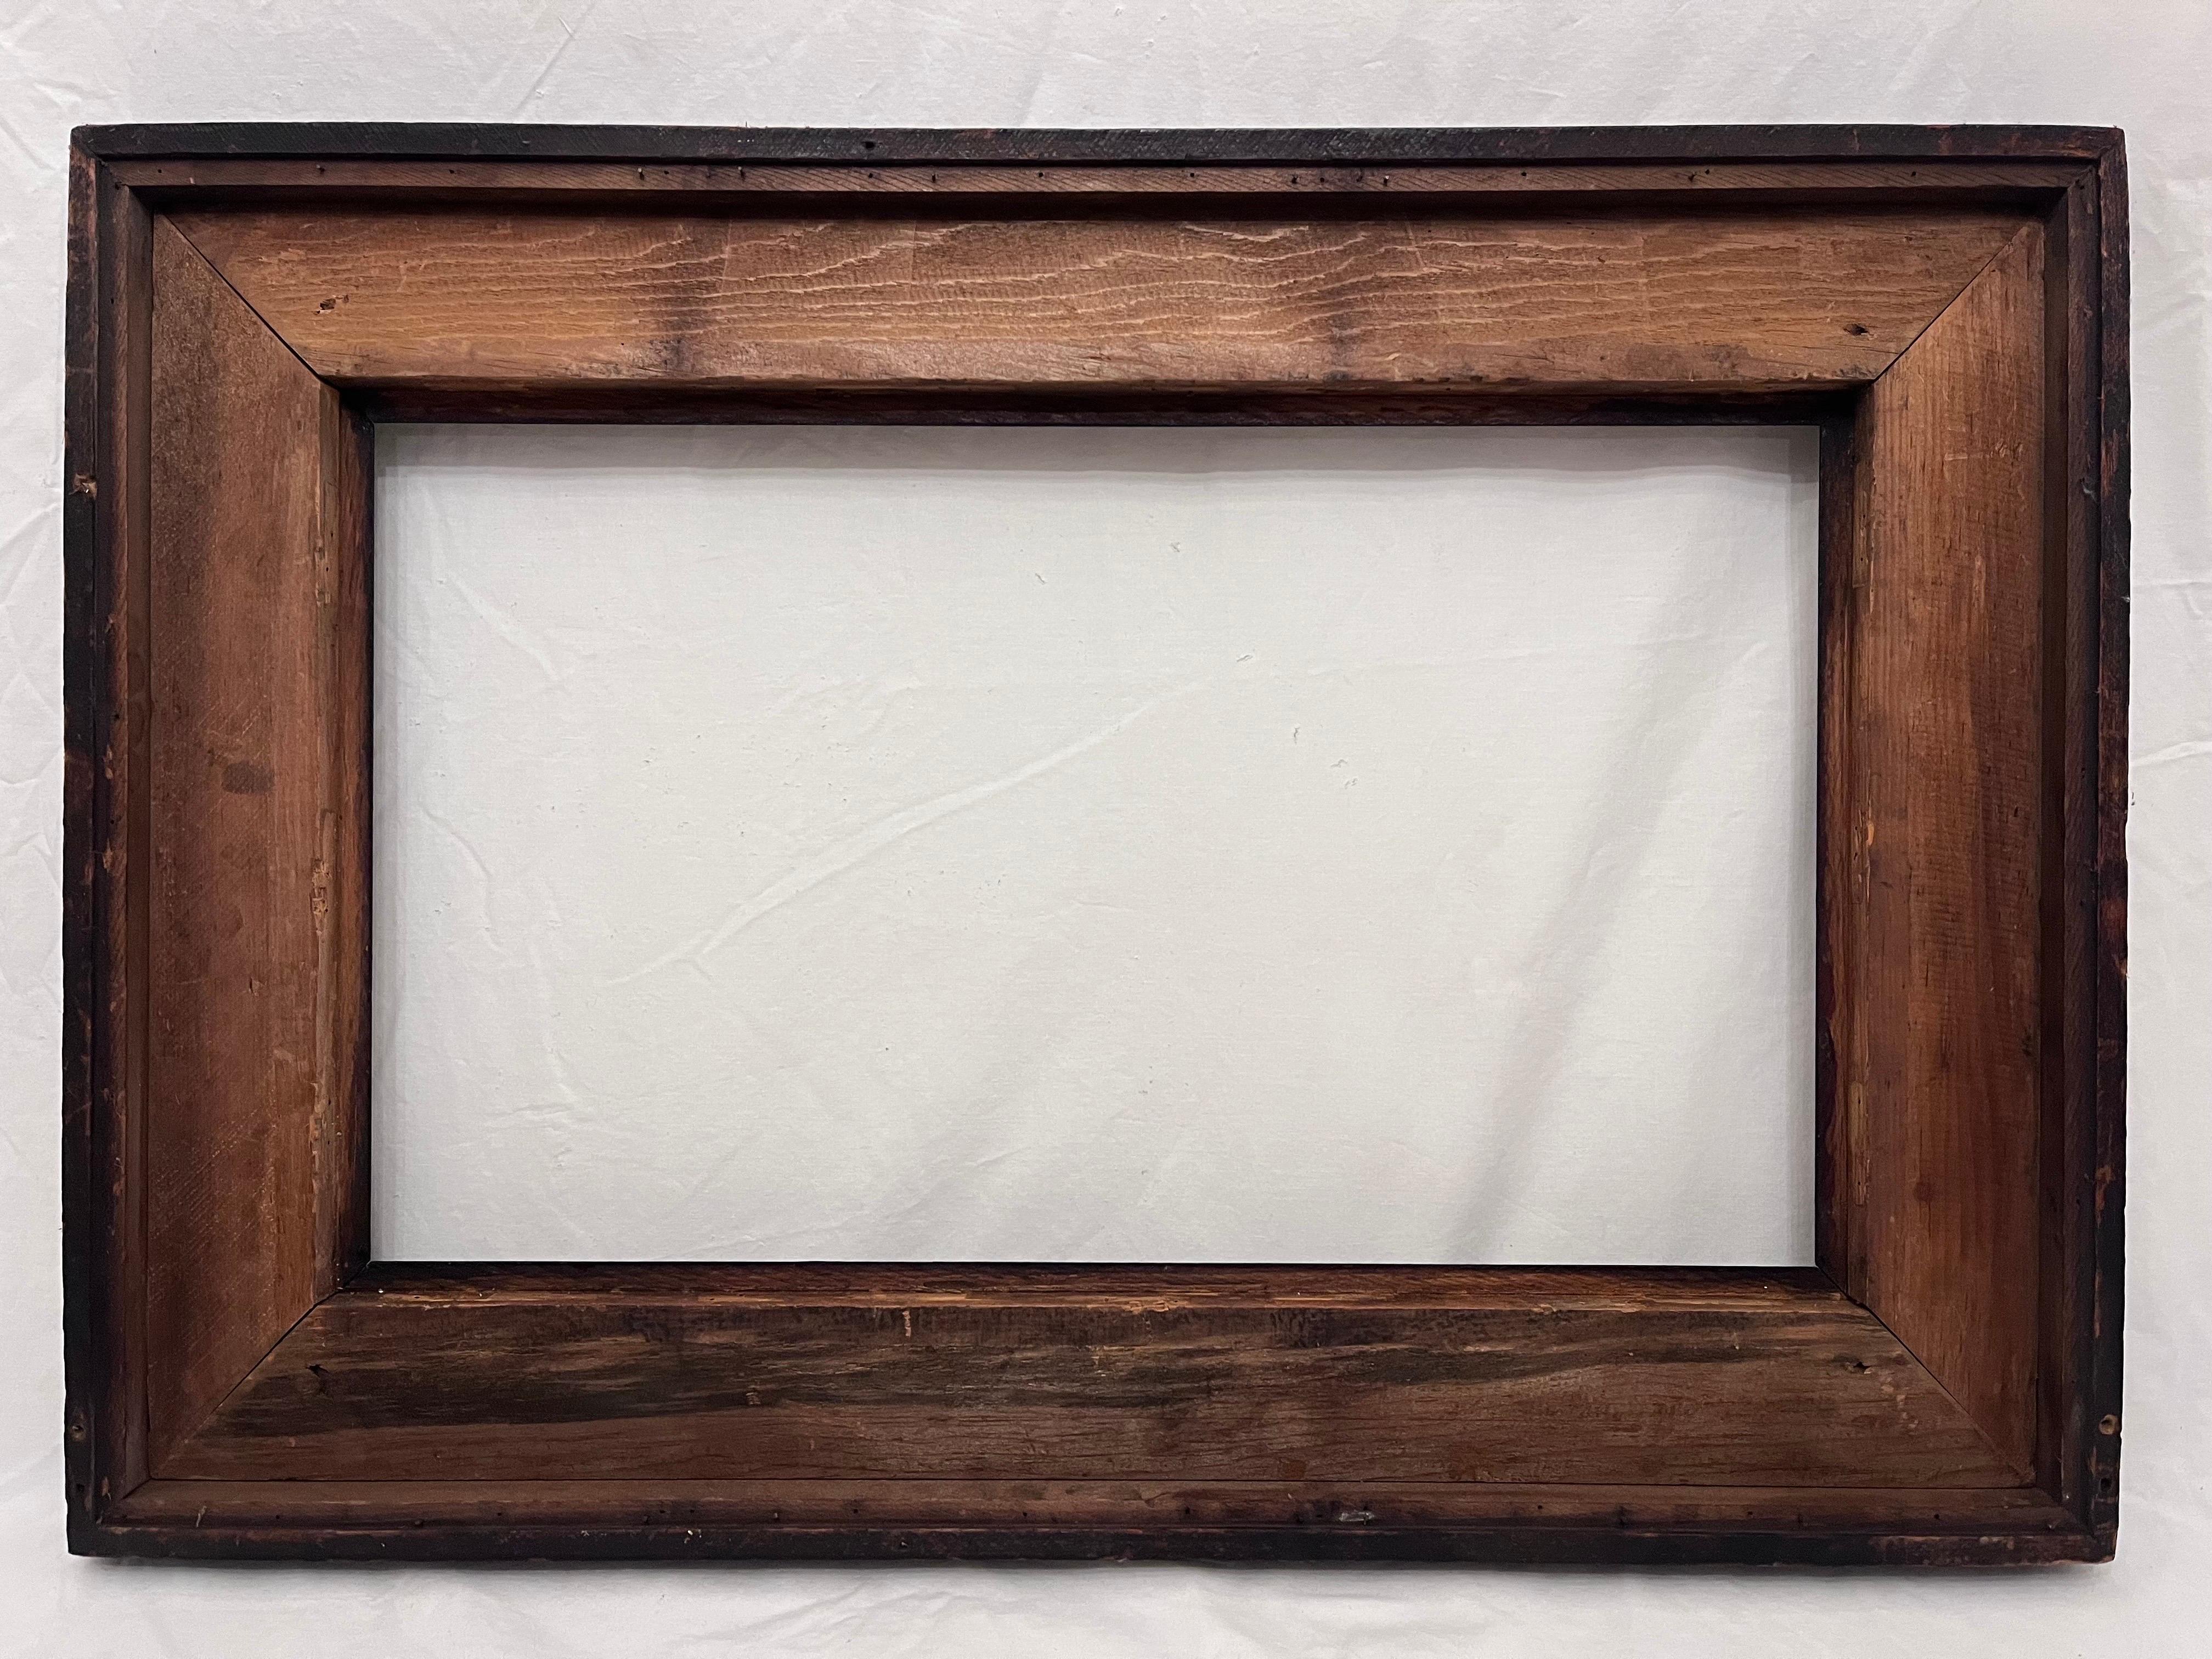 Antique 19th Century American Empire Style Large Picture Mirror Frame 22 x 13 In Good Condition For Sale In Atlanta, GA